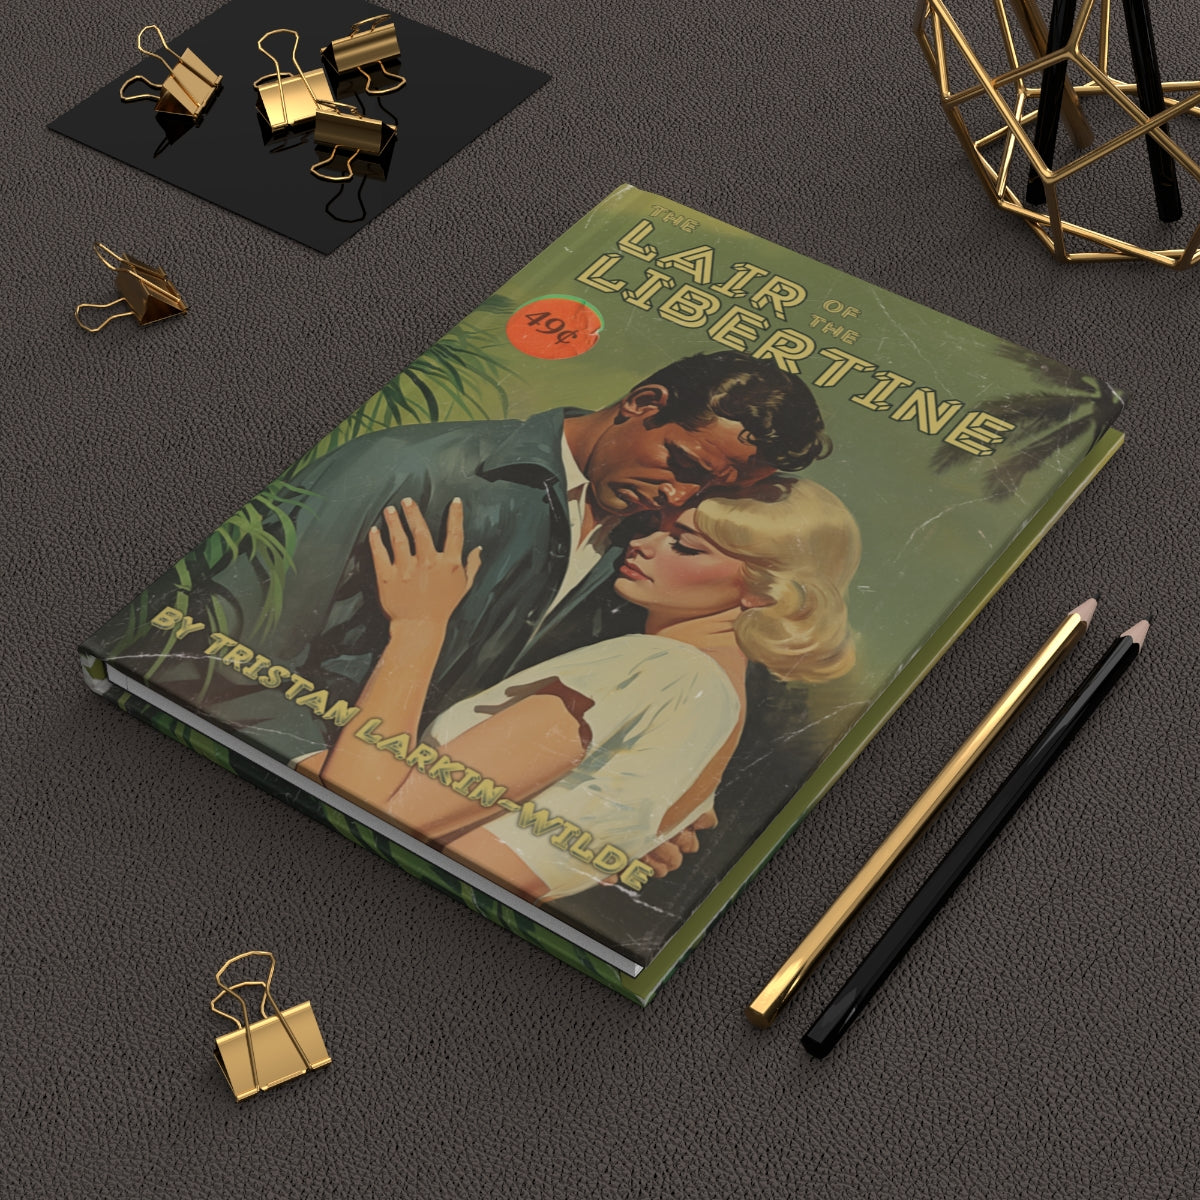 The Lair of the Libertine Hardcover Journal